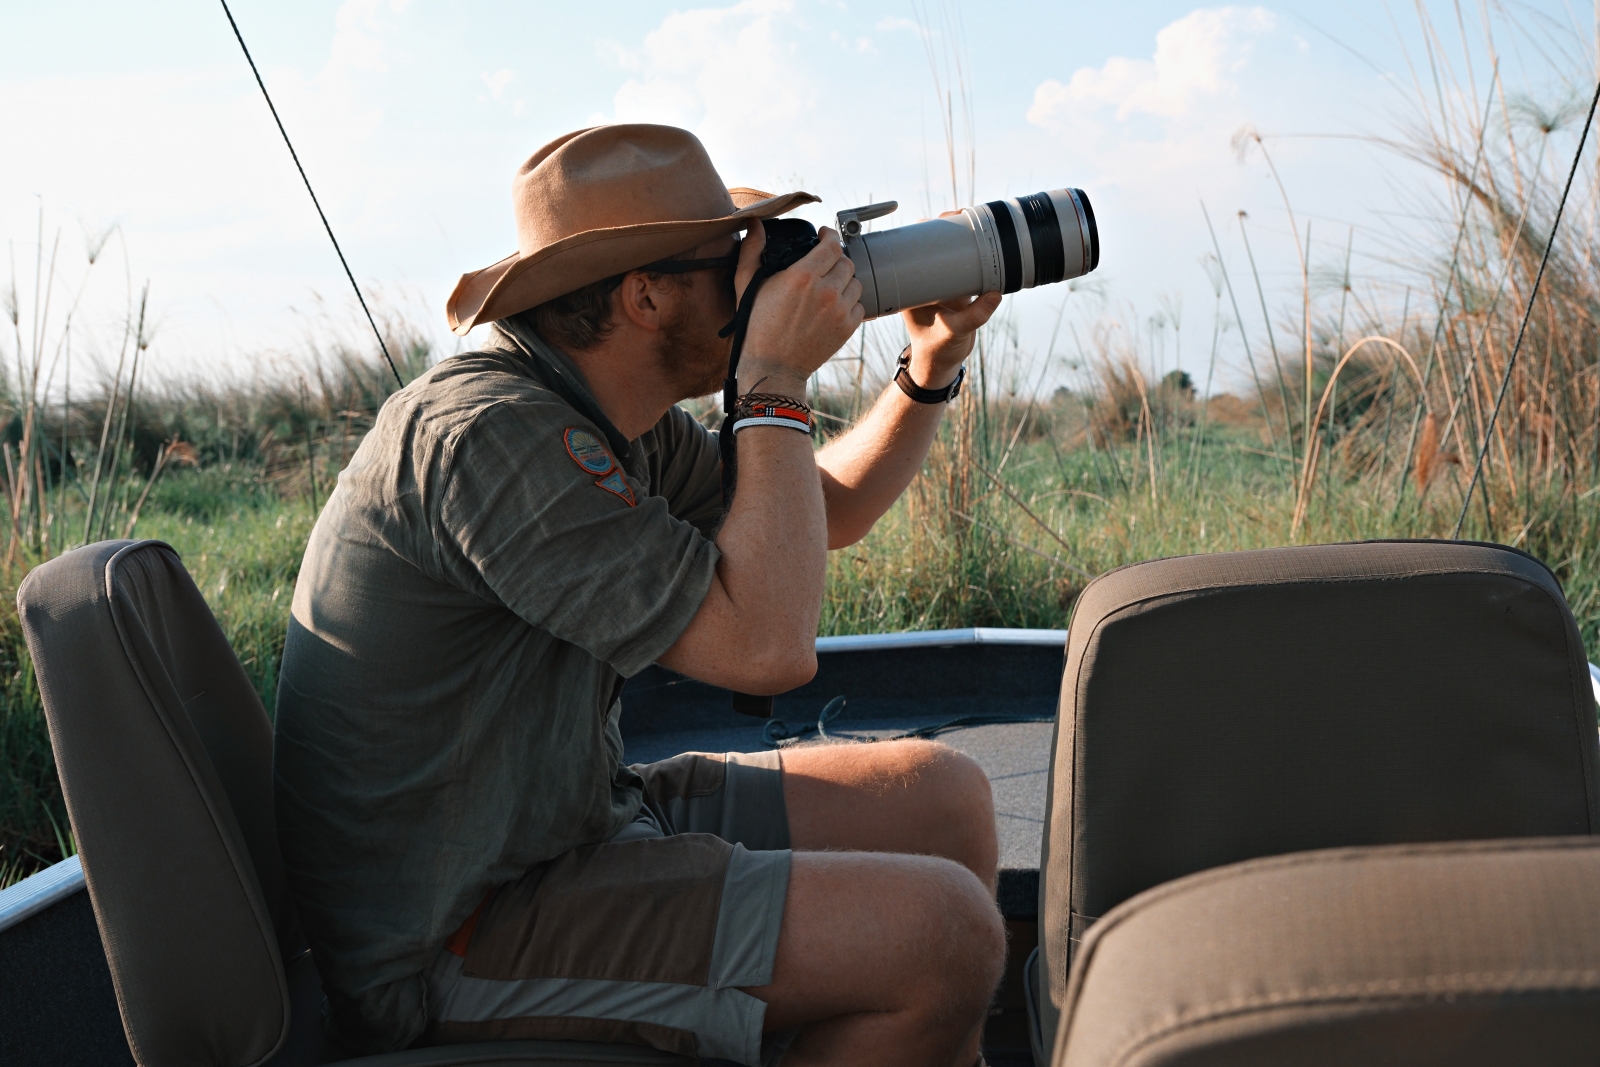 Great Plains Conservation camps provide Canon camera equipement complimentary for guests